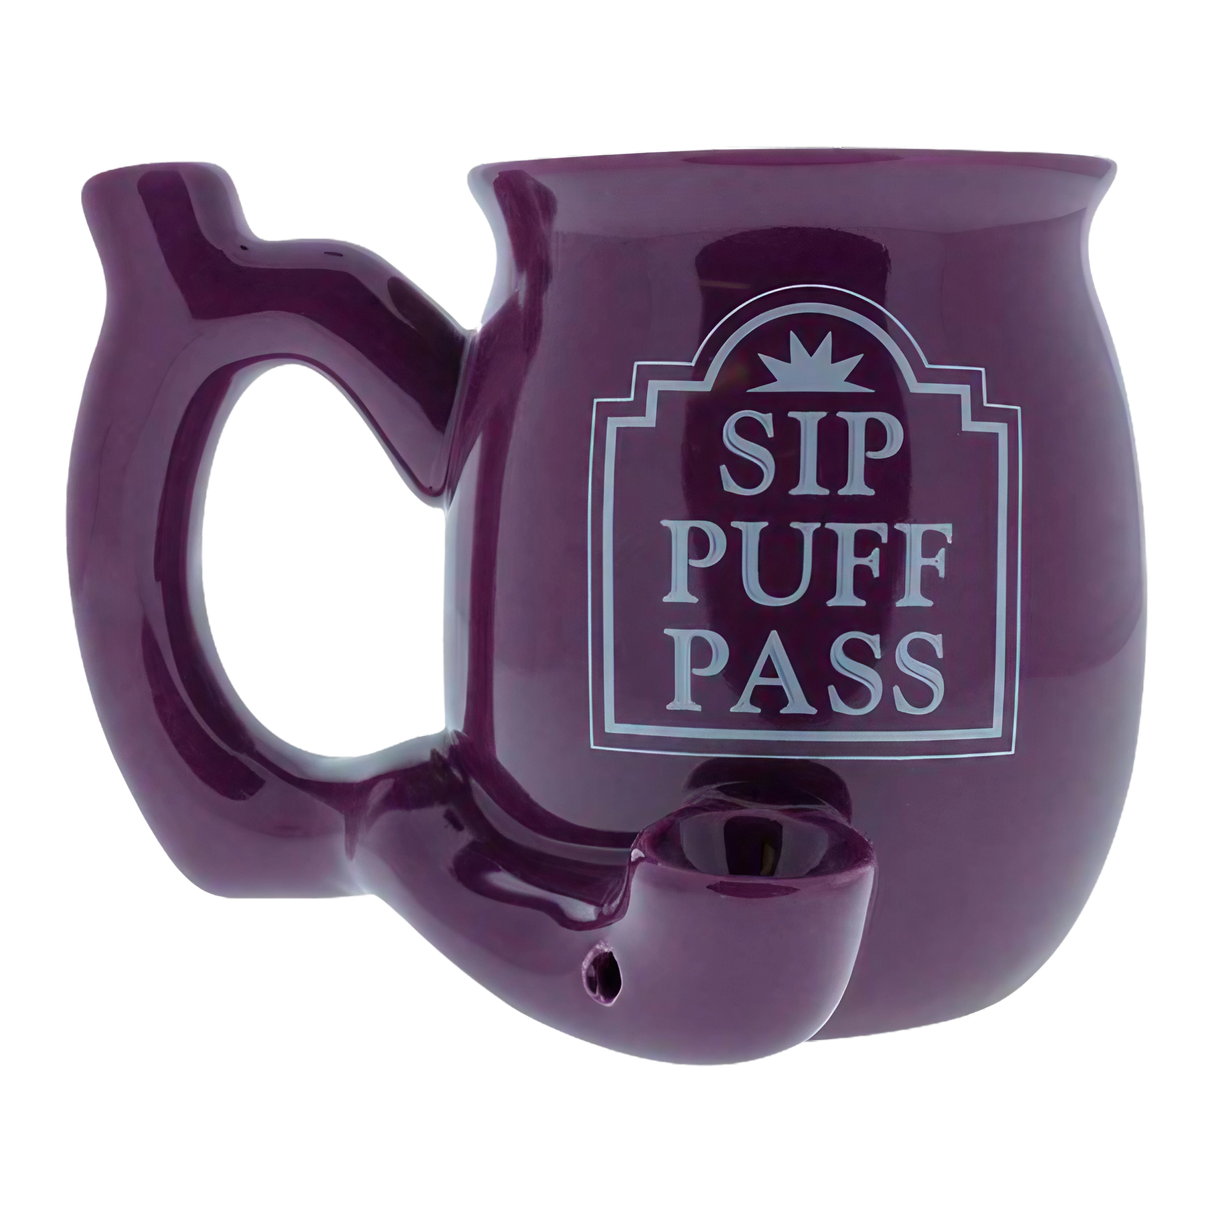 Roast & Toast Ceramic Mug Pipe in Purple - Front View with Sip Puff Pass Design